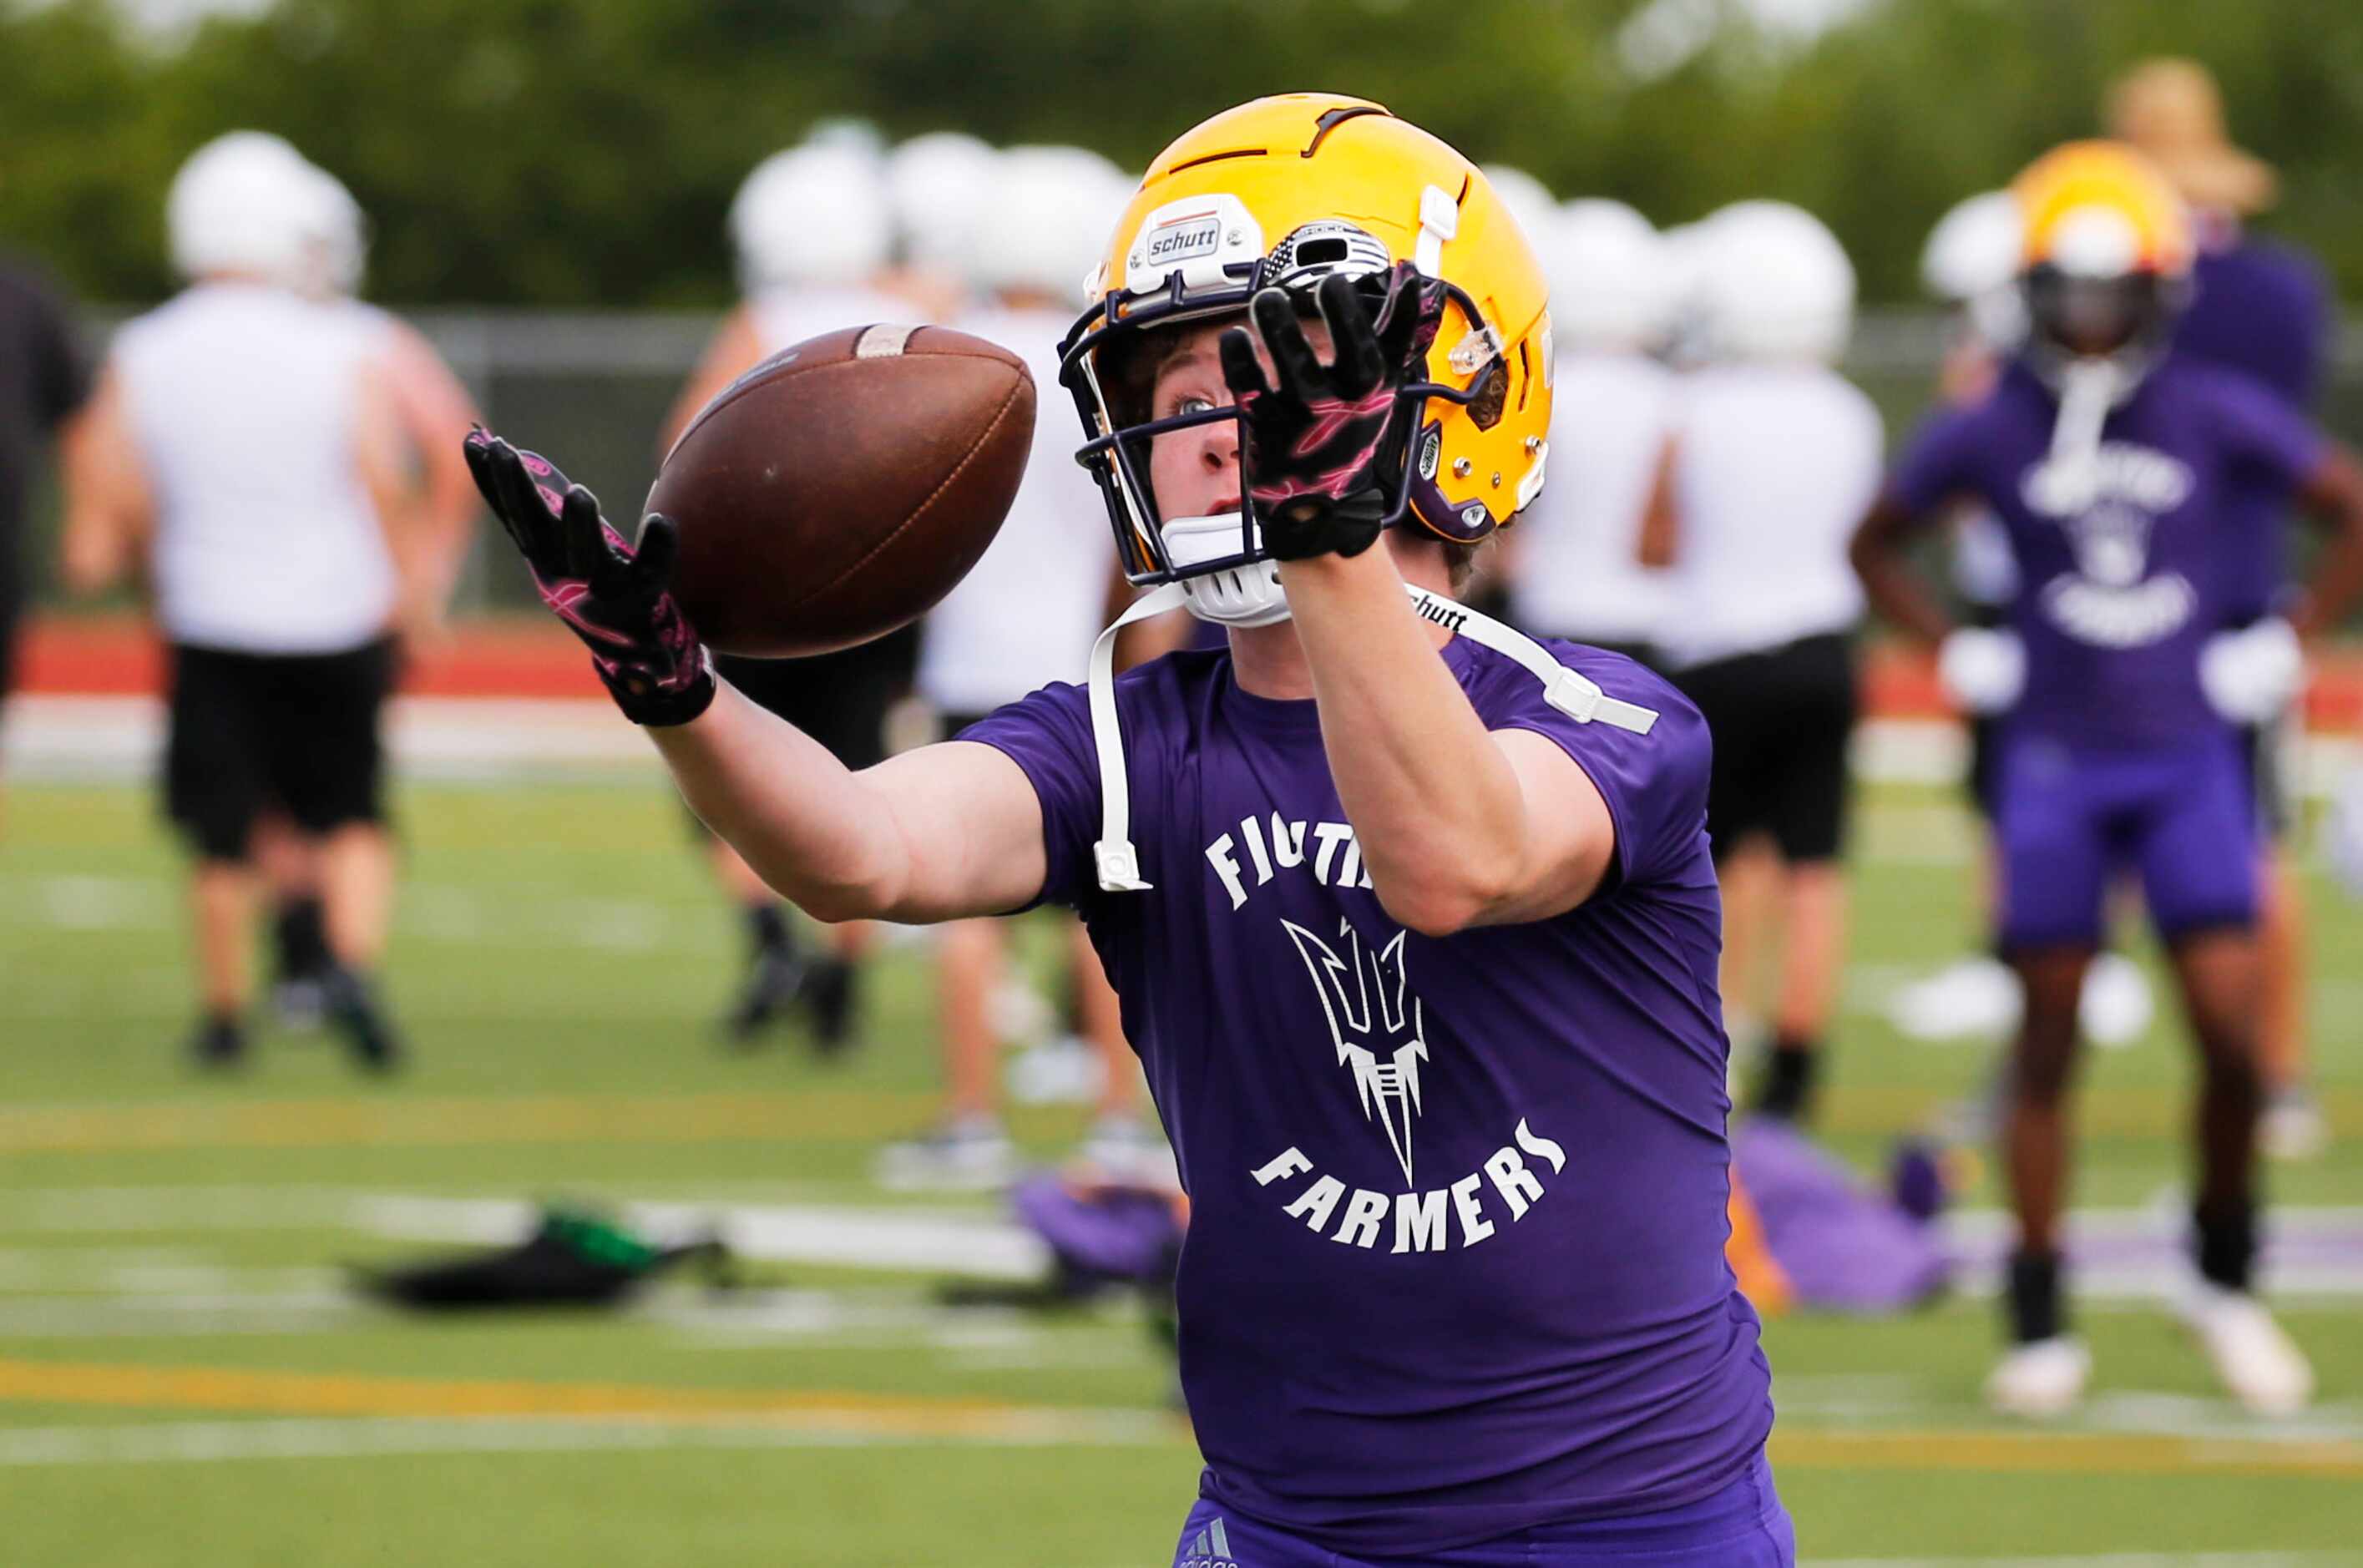 Farmersville's Gavin Parks makes a catch in a drill during the first day of high school...